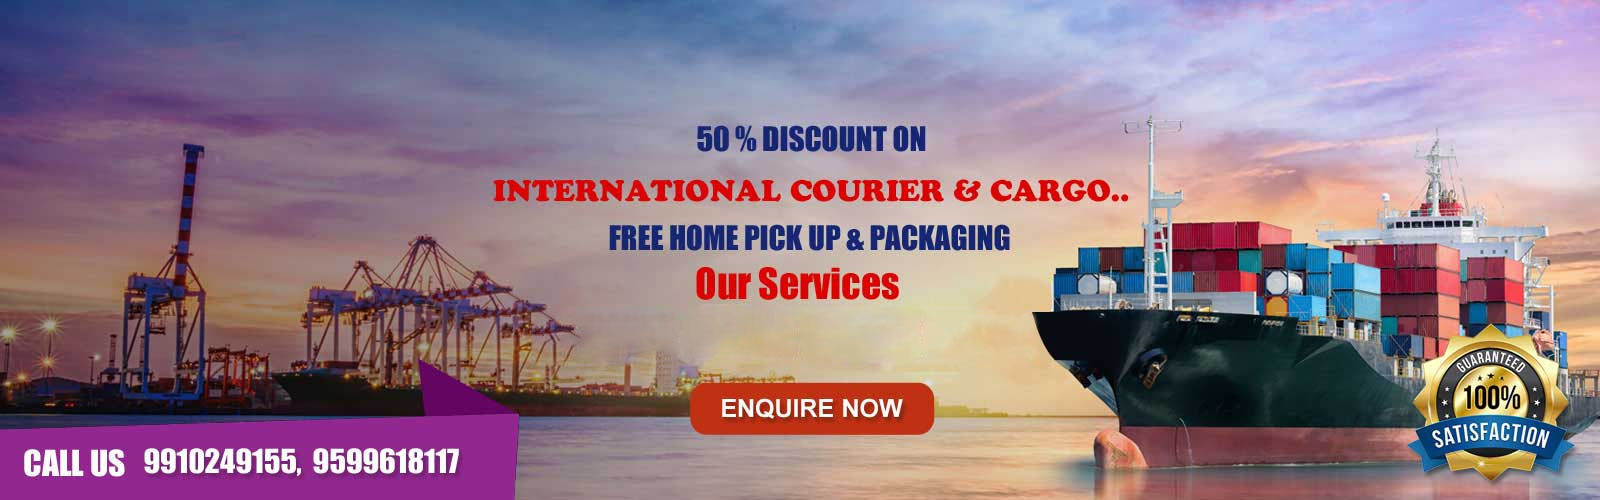 International Courier and Cargo in Gurgaon